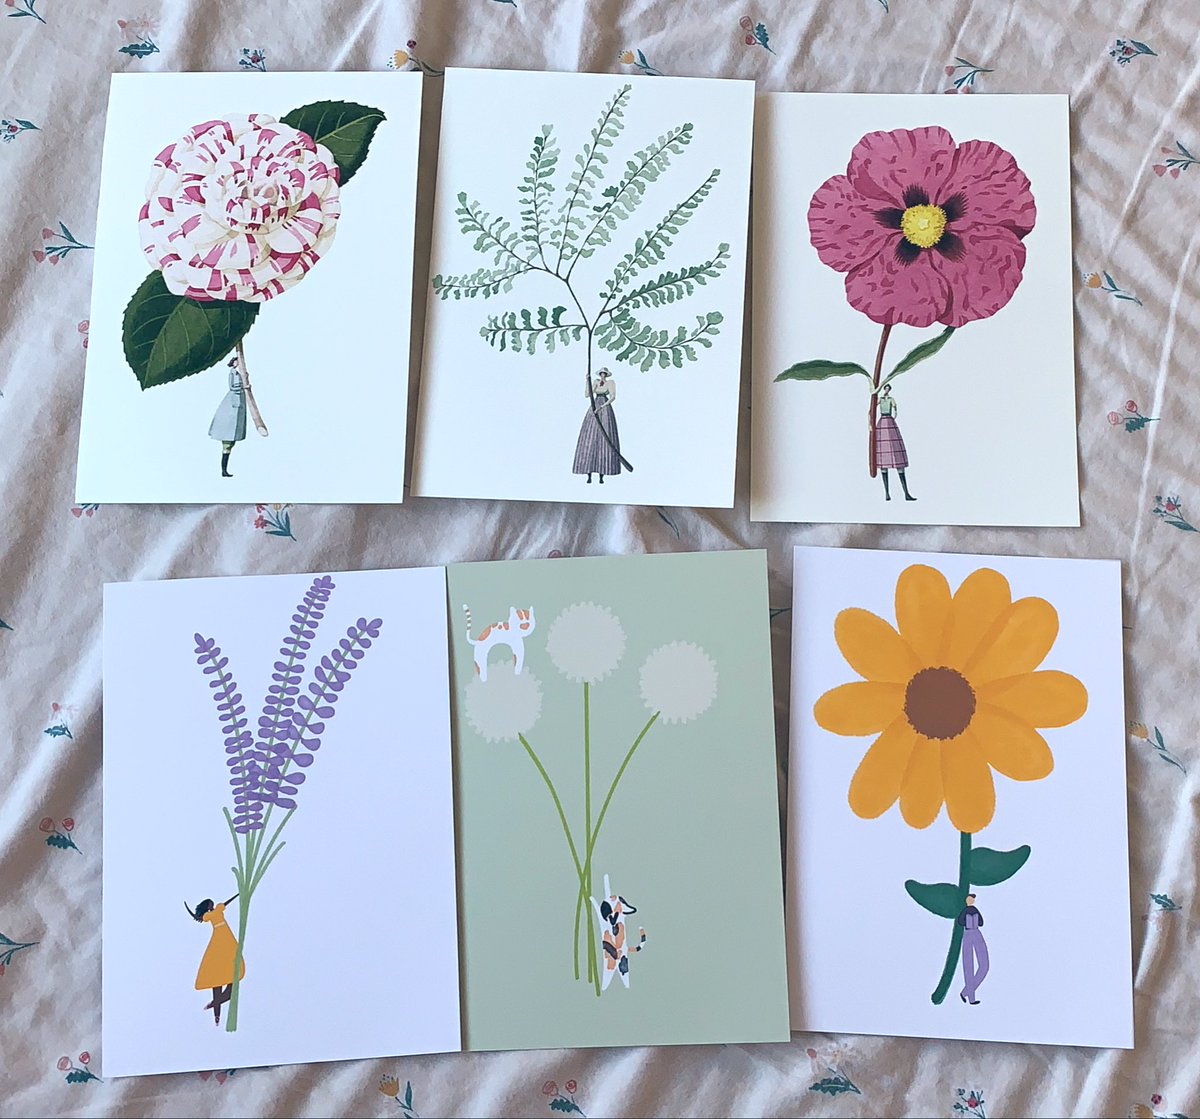 Hi. I need to share the gift I got from yesterday. The top images are prints H found and got for me, but they went ahead to draw the bottom ones which includes us holding our favorite flowers, plus the middle one which shows our cats Amanita & Dublin with a dandelion! I JUST😭🥺 